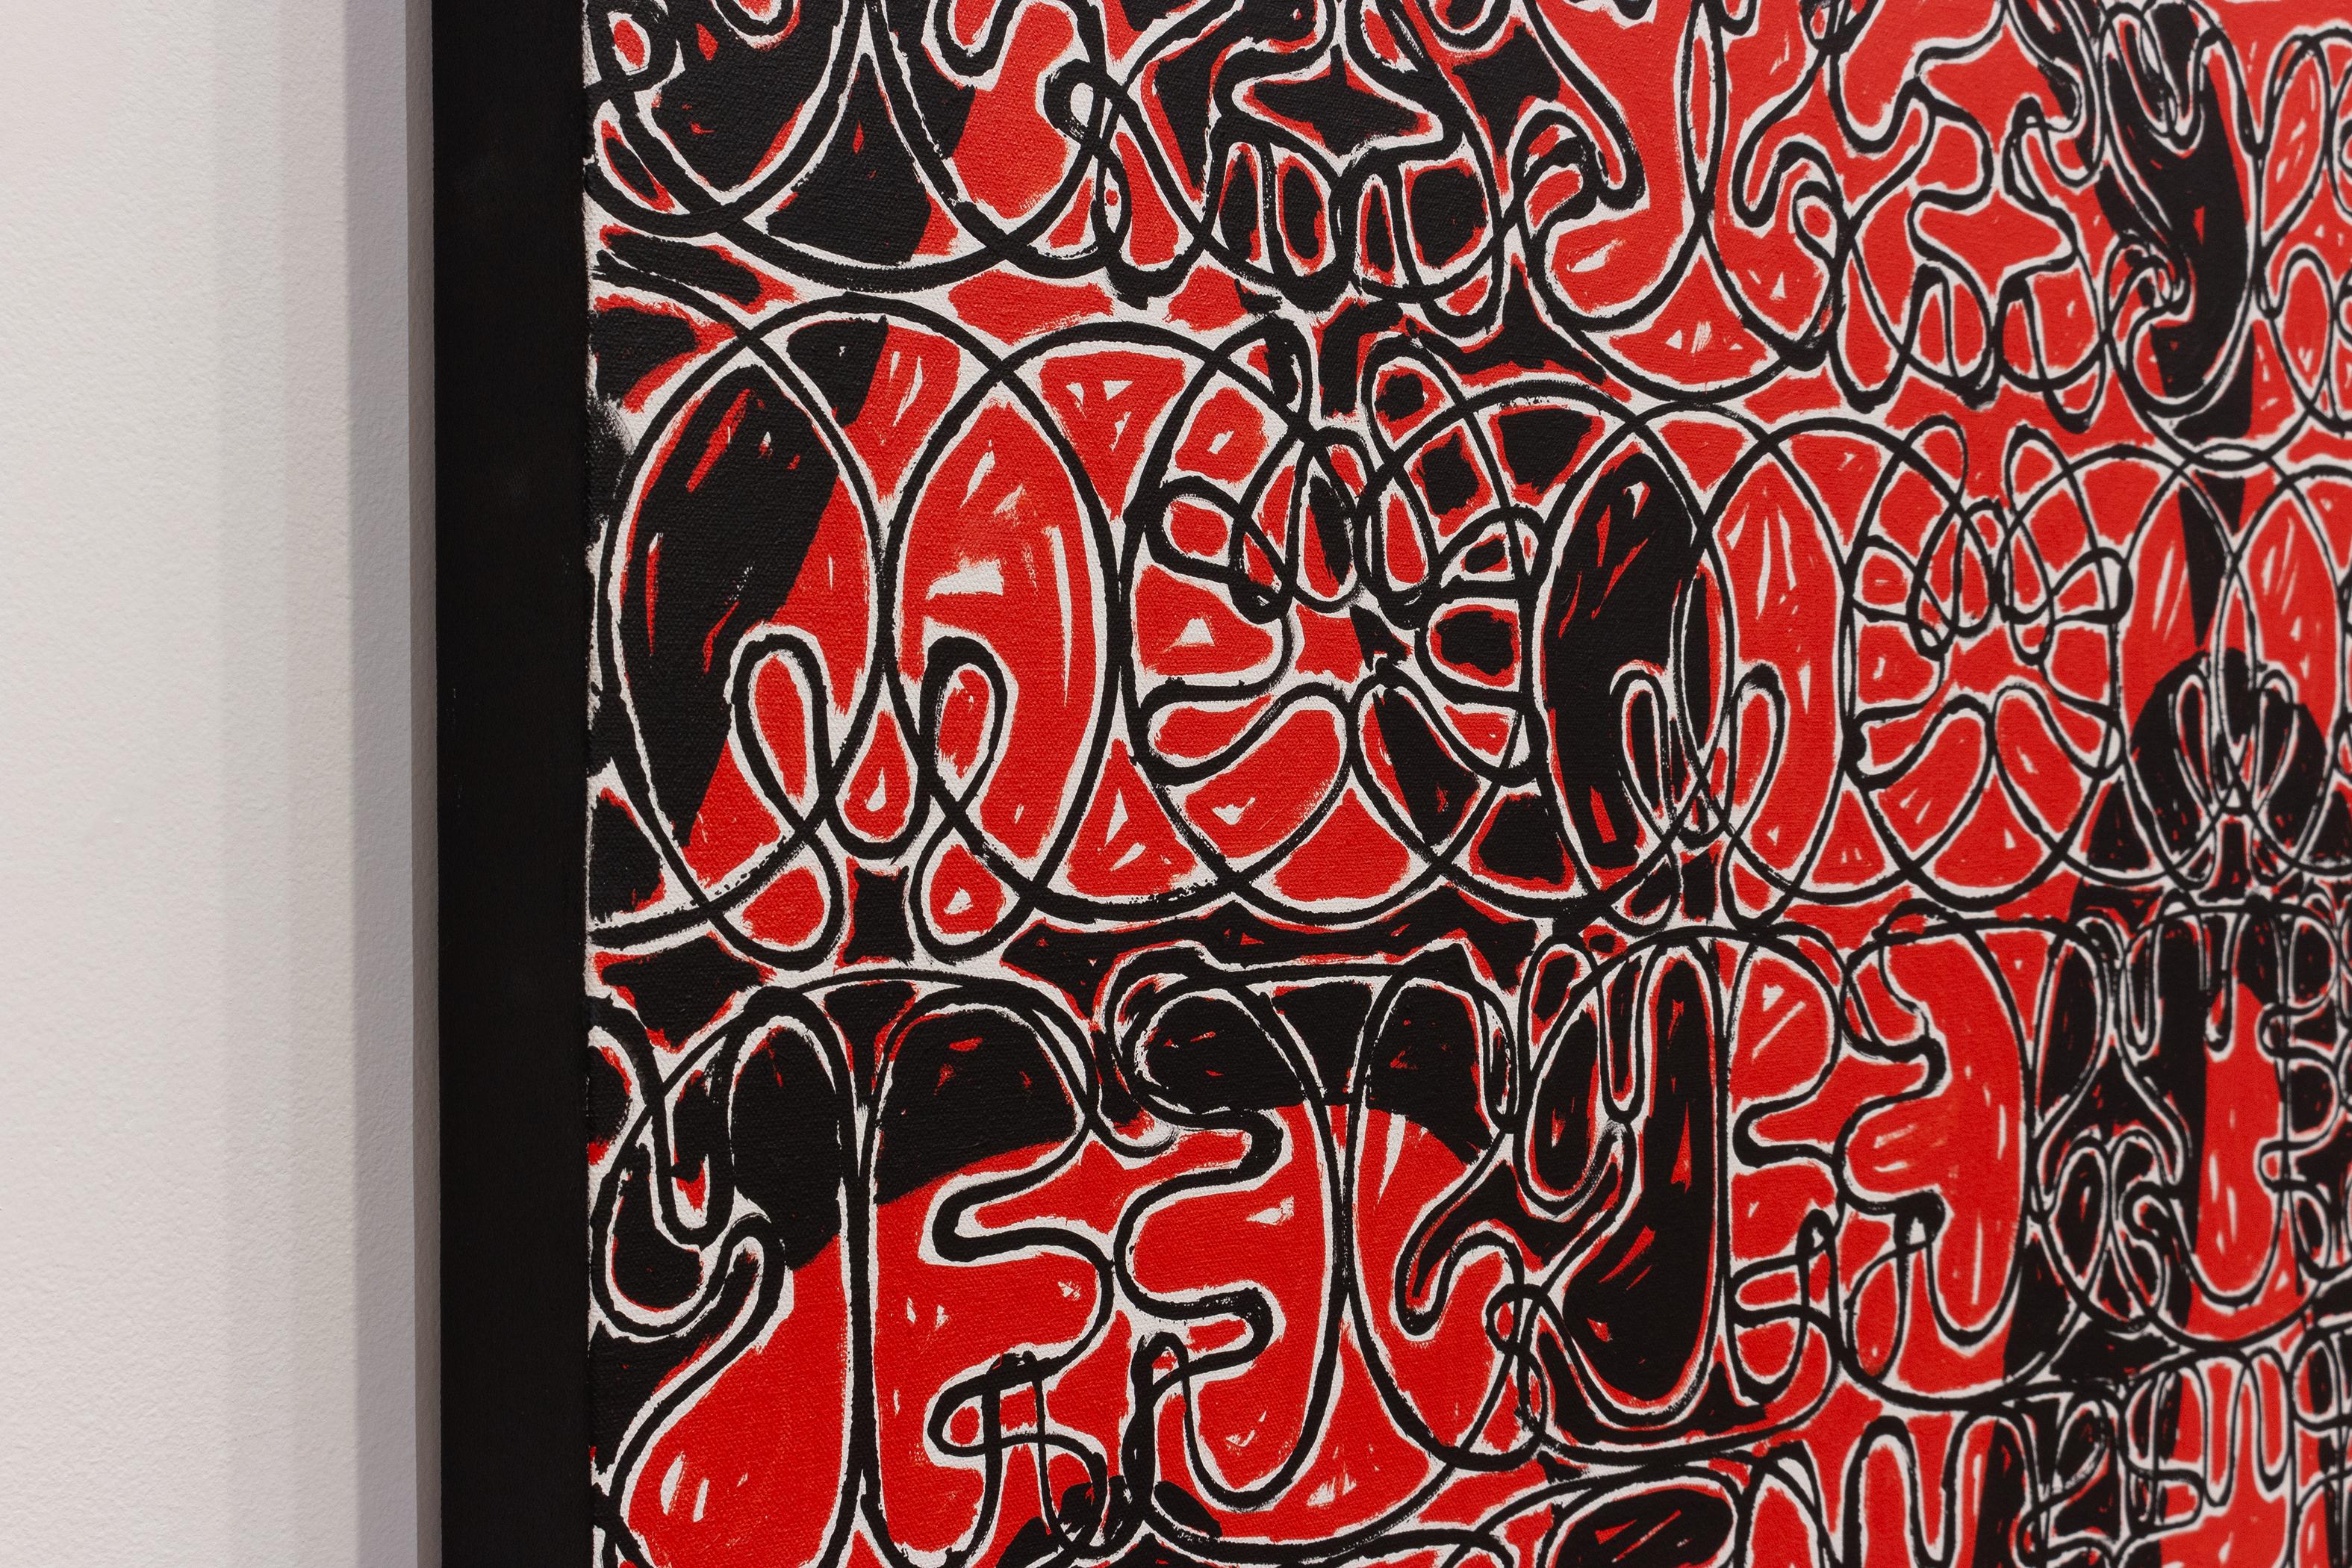 This large-scale abstract work features organic and undulating shapes. Red and black - modern.

Colombian-born, Atlanta-based artist Esteban Patino creates paintings, collages, and sculptures that explore the multitudes of language creation and